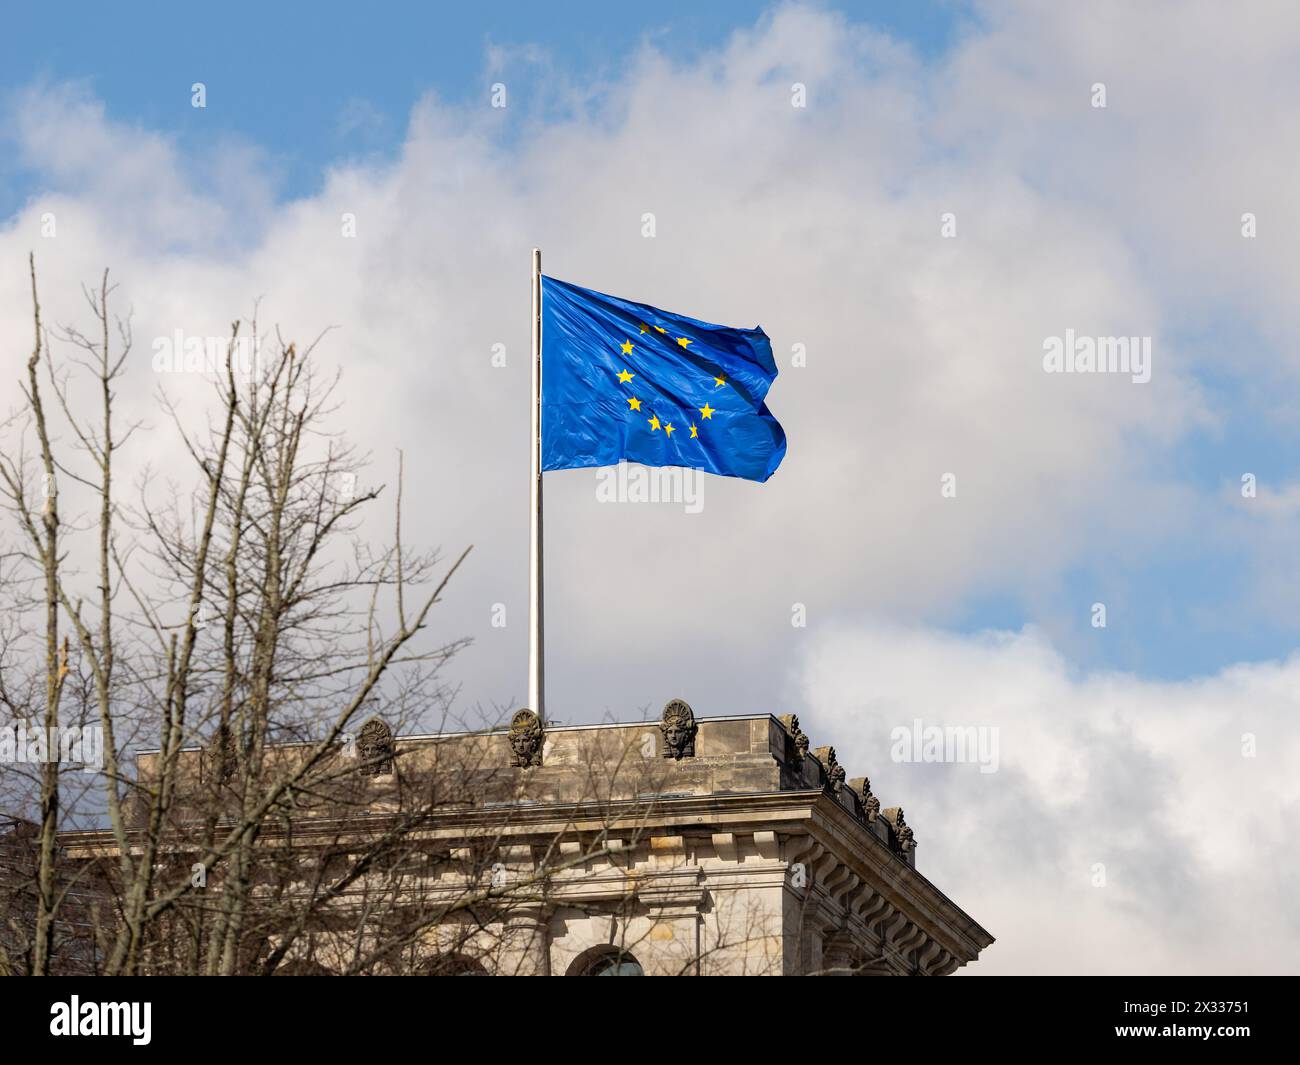 EU flag of the European Union on a governmental building exterior in Germany. Waving blue textile with yellow stars. Sign for democracy and politics. Stock Photo